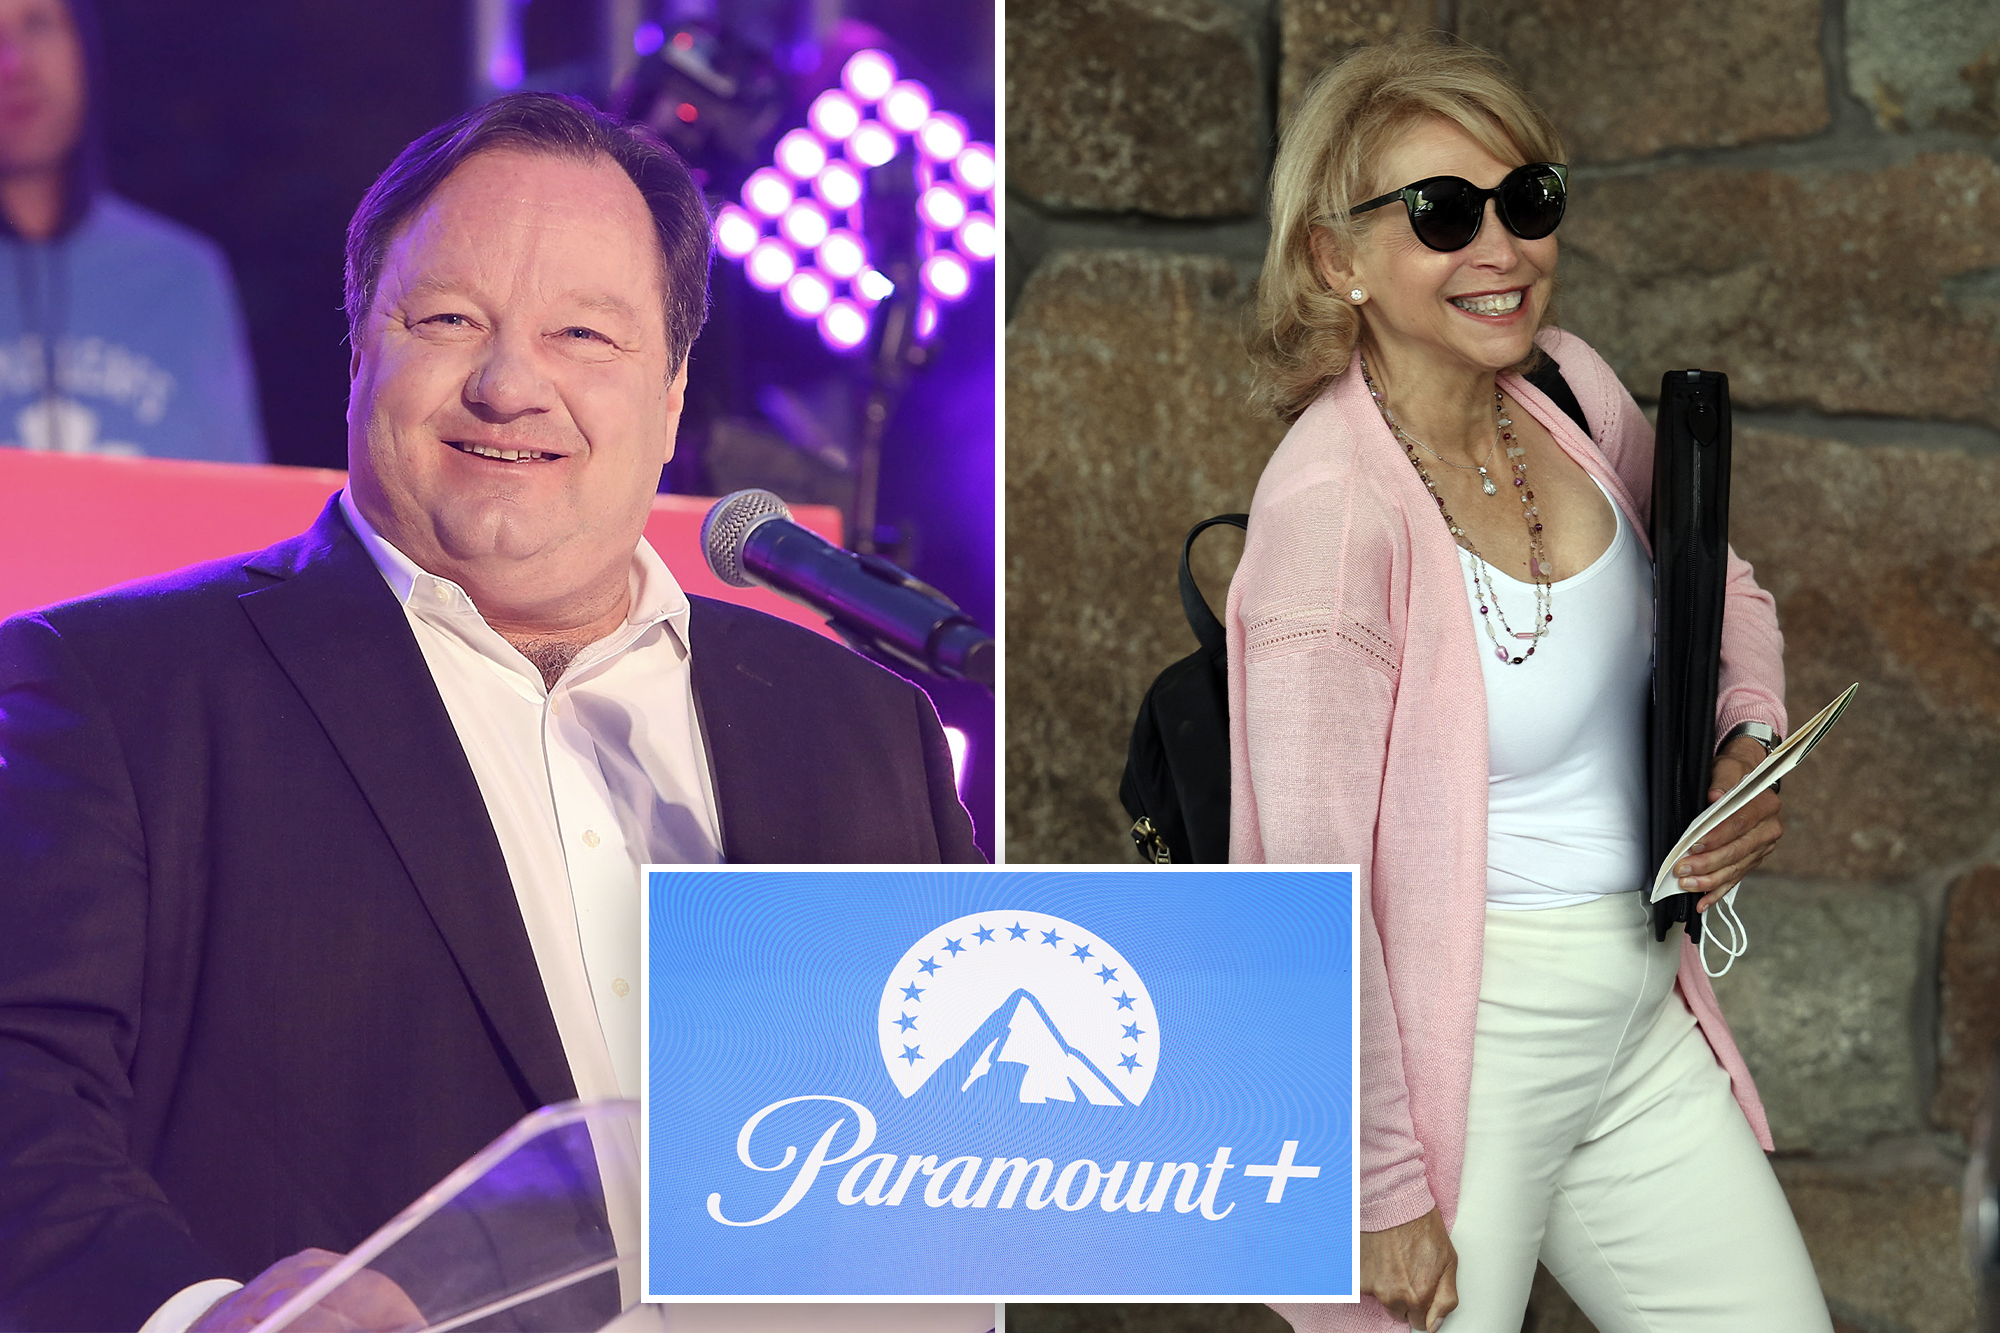 Paramount CEO Bob Bakish expected to resign after clashing with Shari Redstone: reports